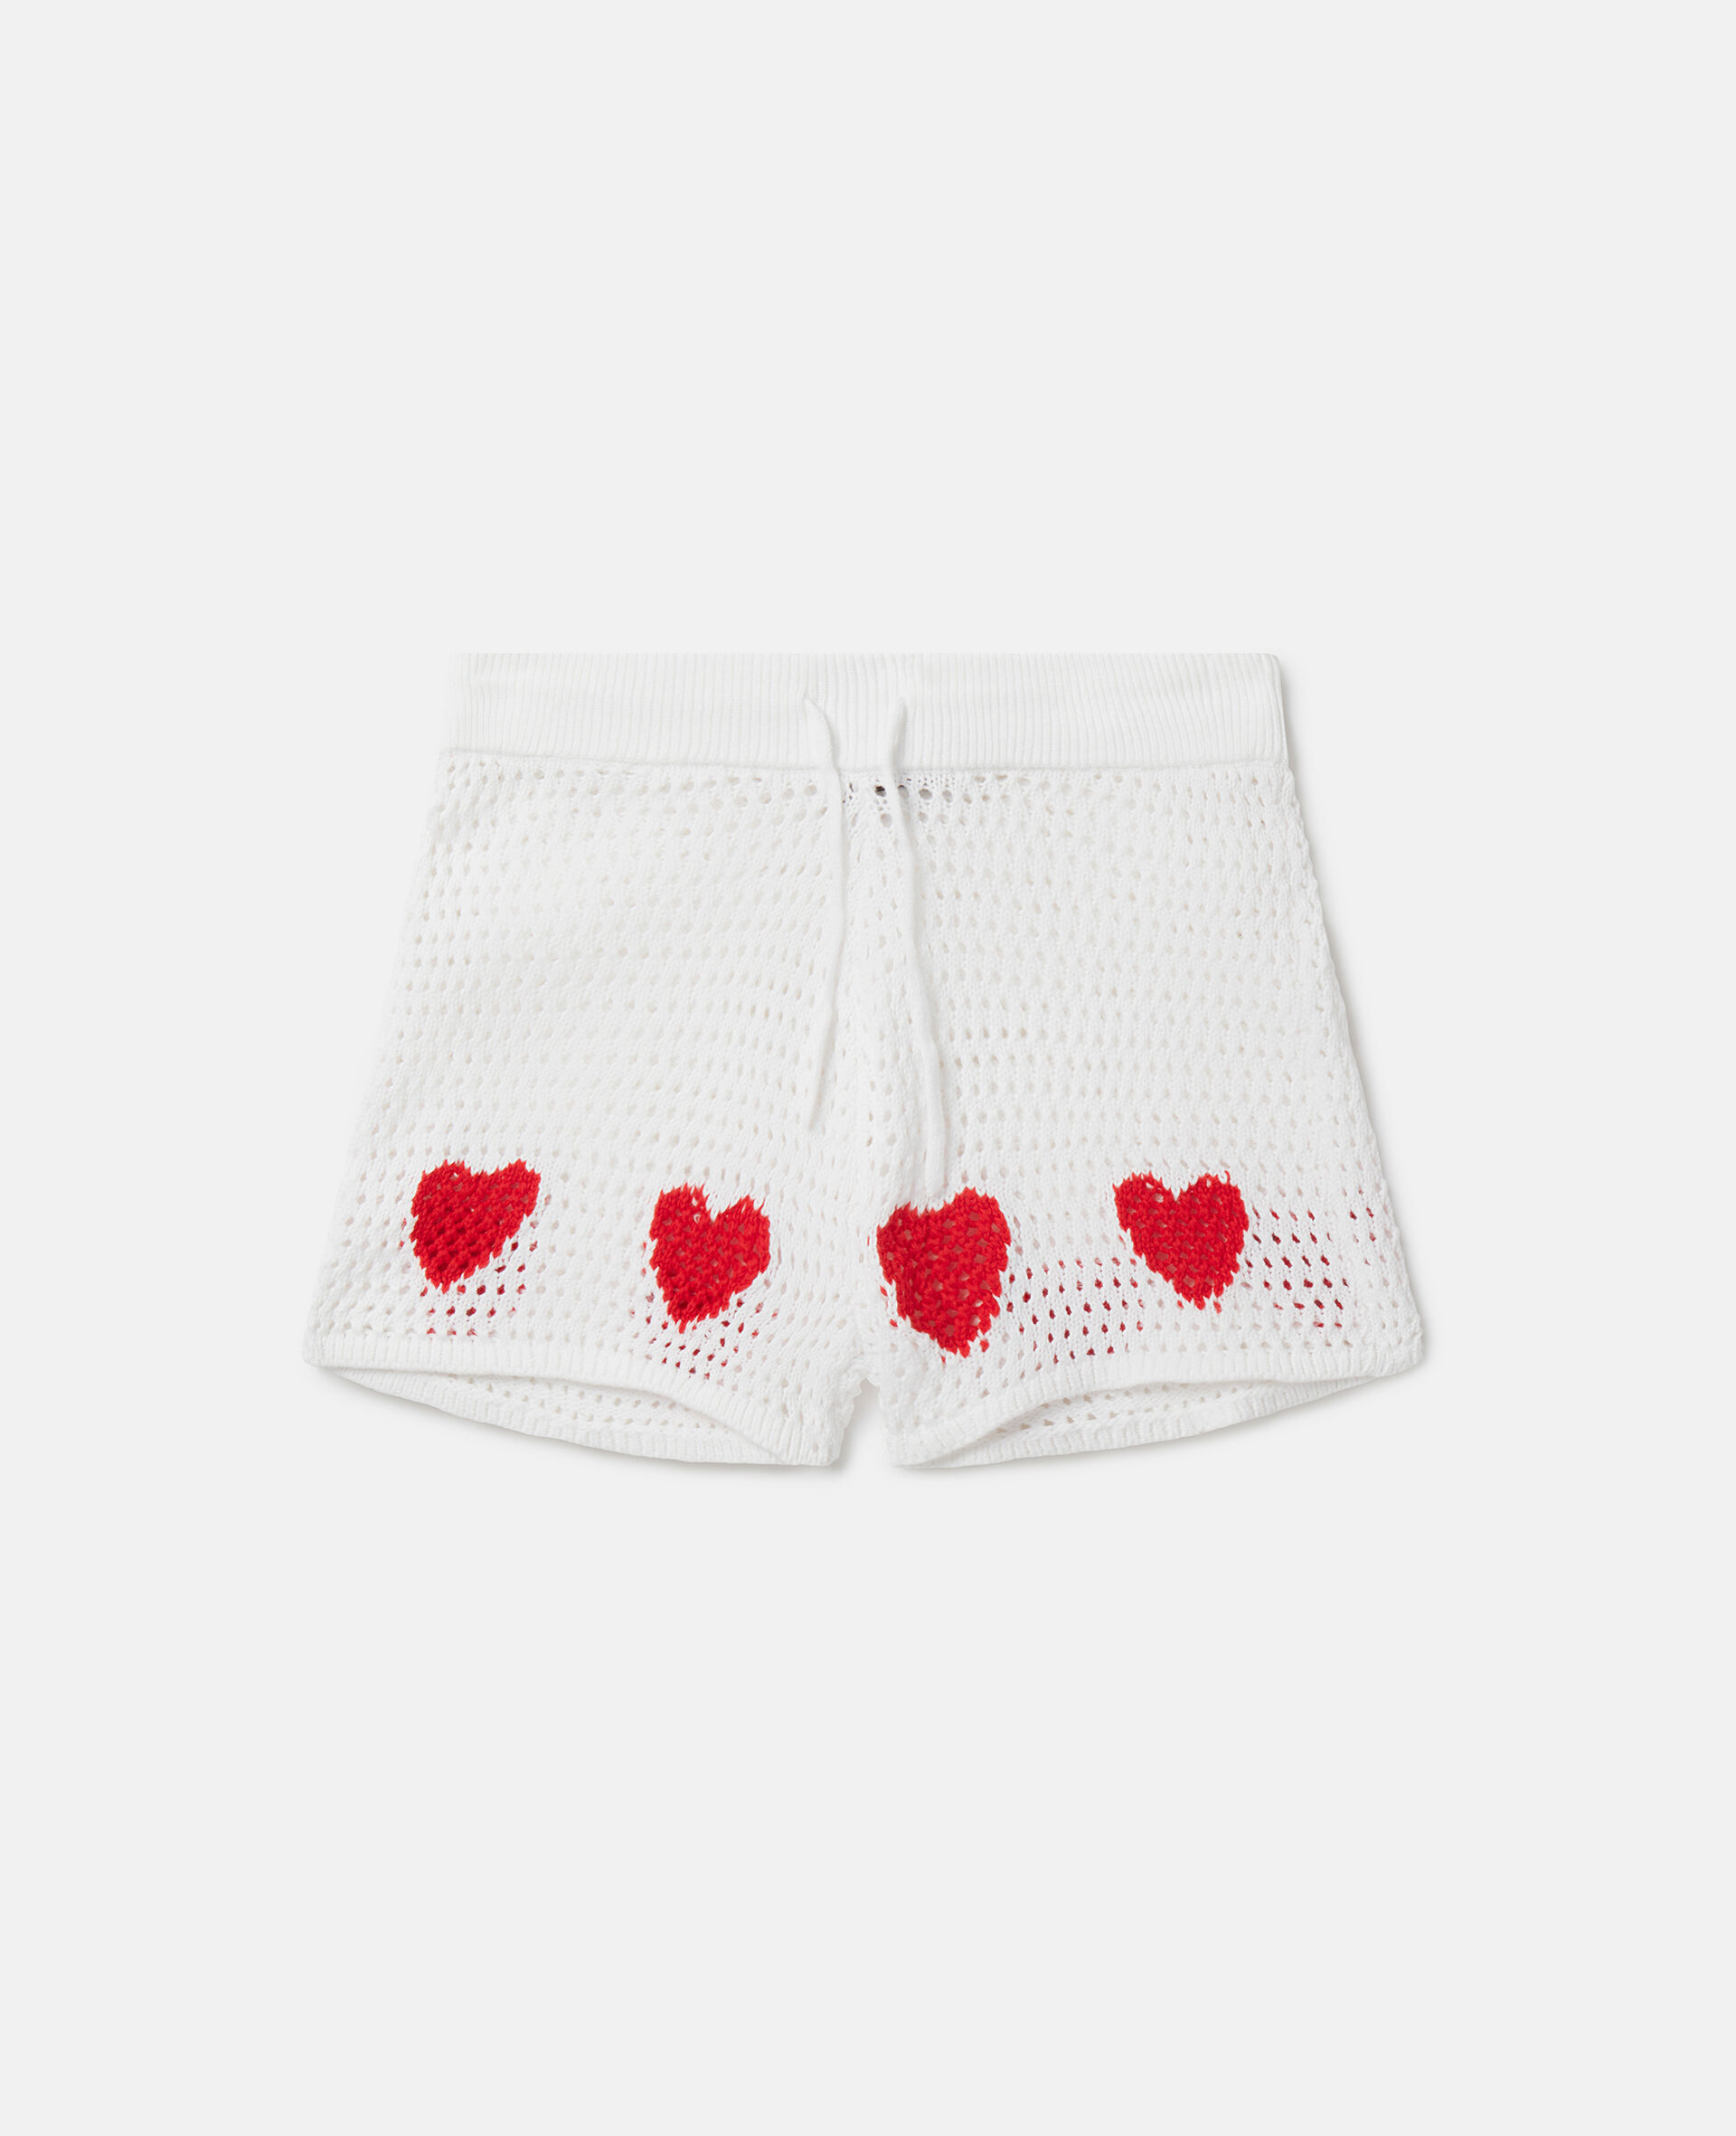 Shorts con cuore all’uncinetto-Bianco-large image number 0